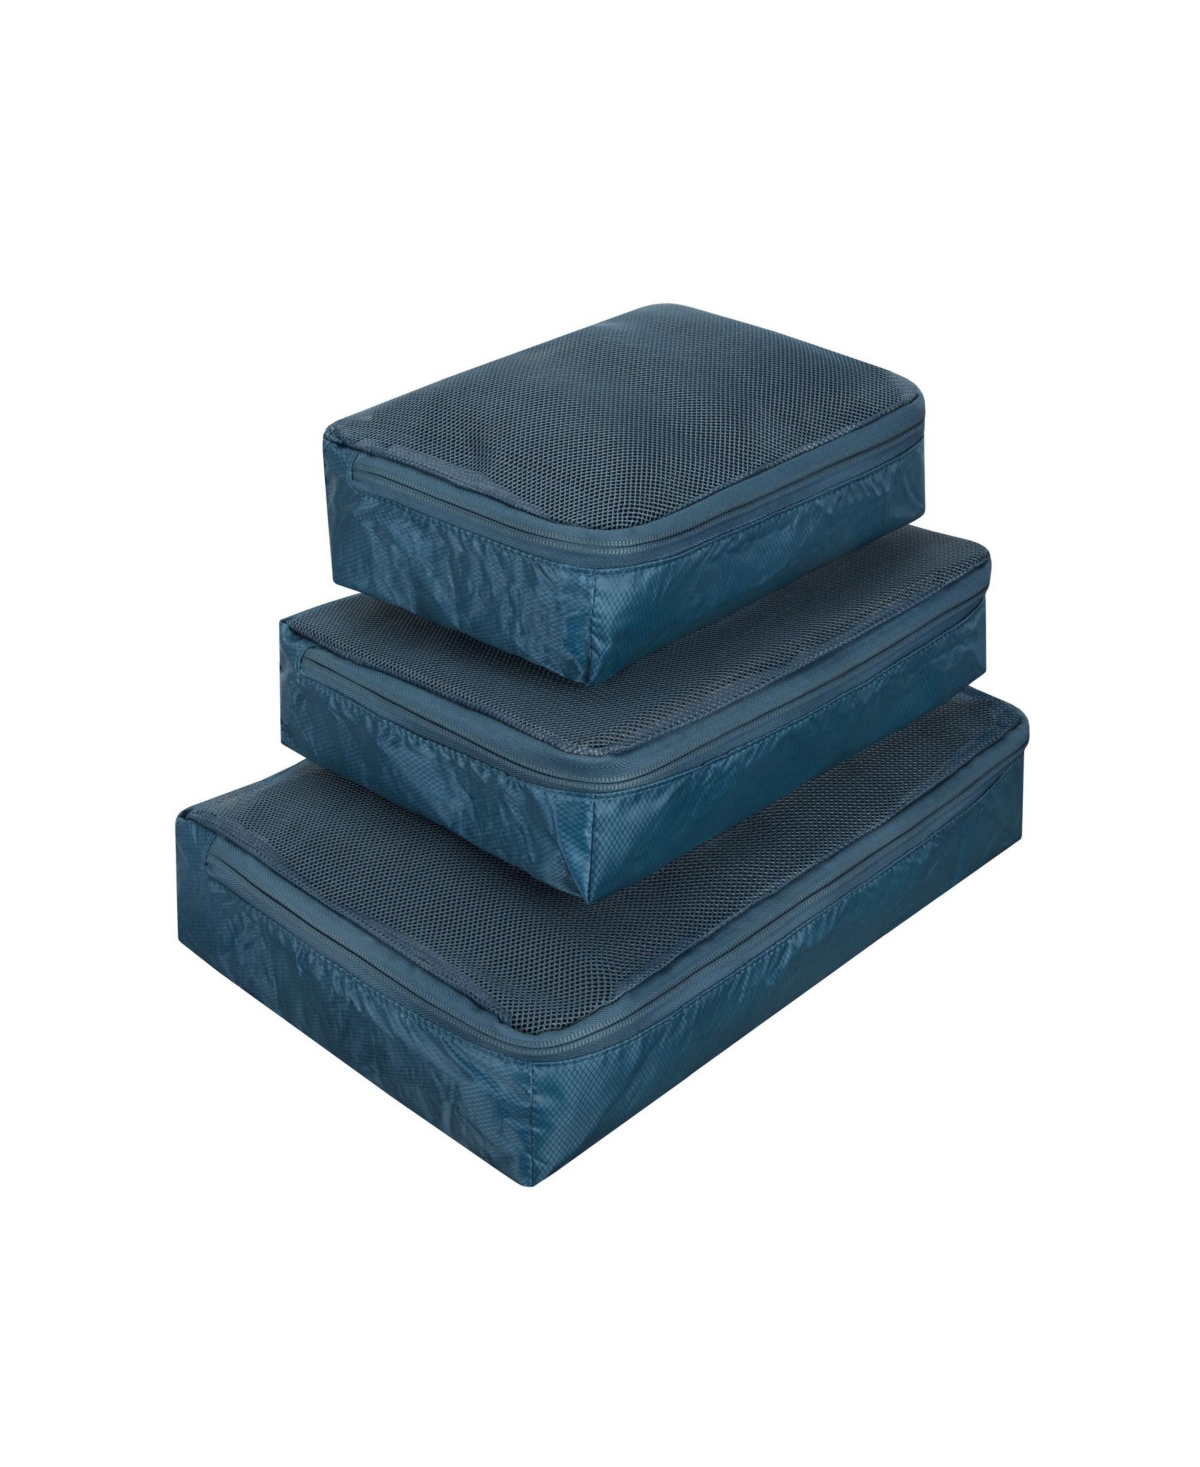 Packing Cubes, Set of 3 - Blackberry